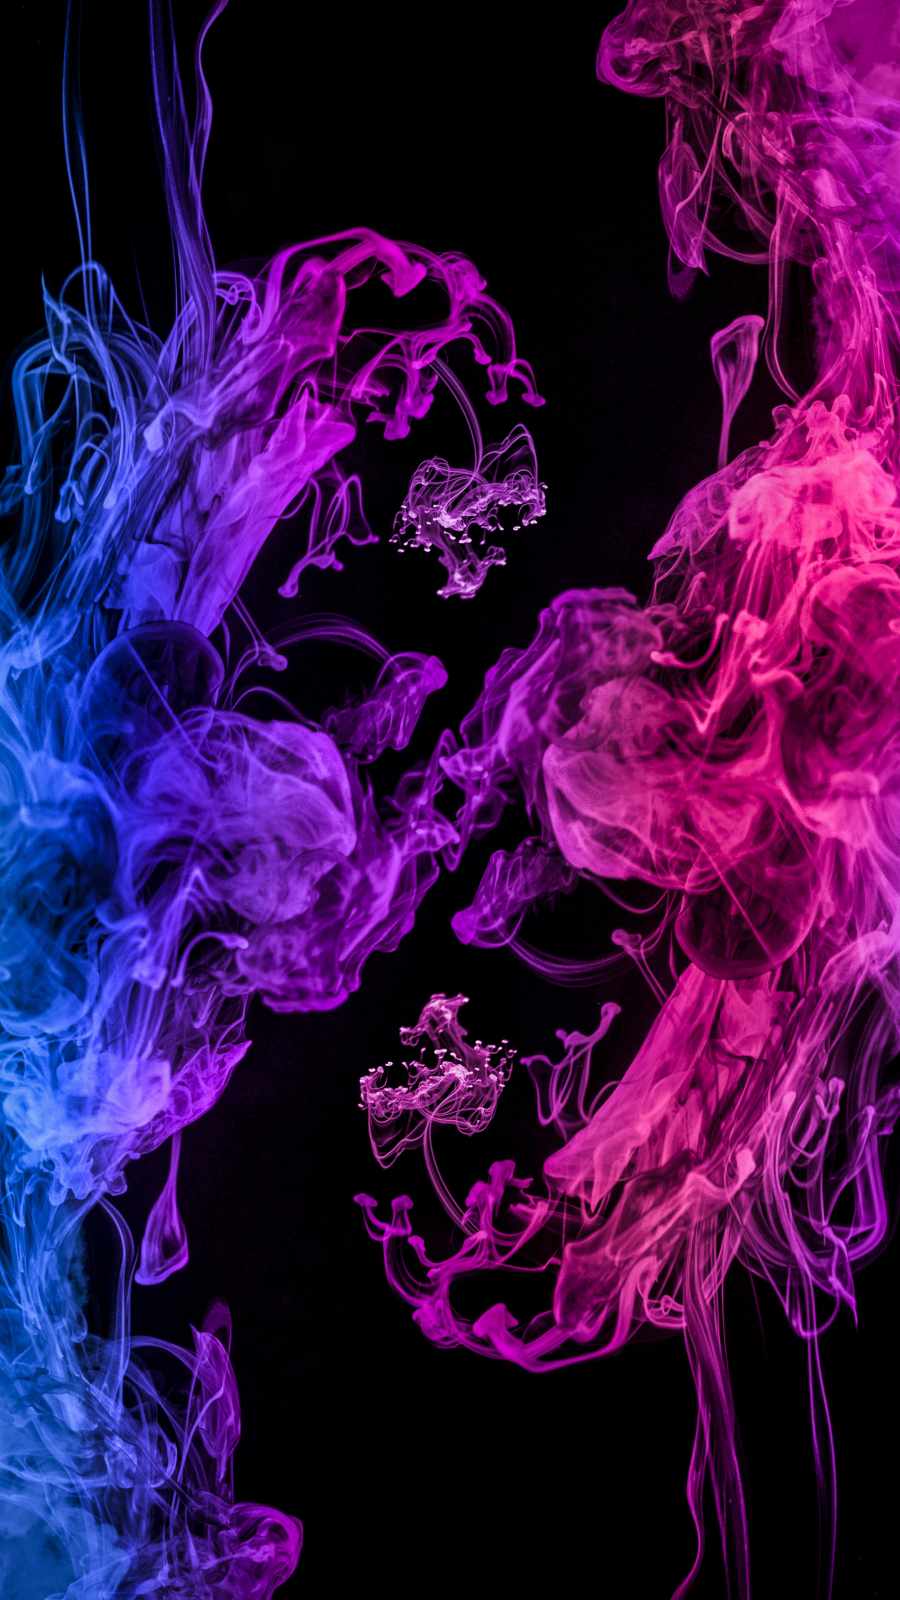 Color Smoke IPhone Wallpaper   IPhone Wallpapers iPhone Wallpapers